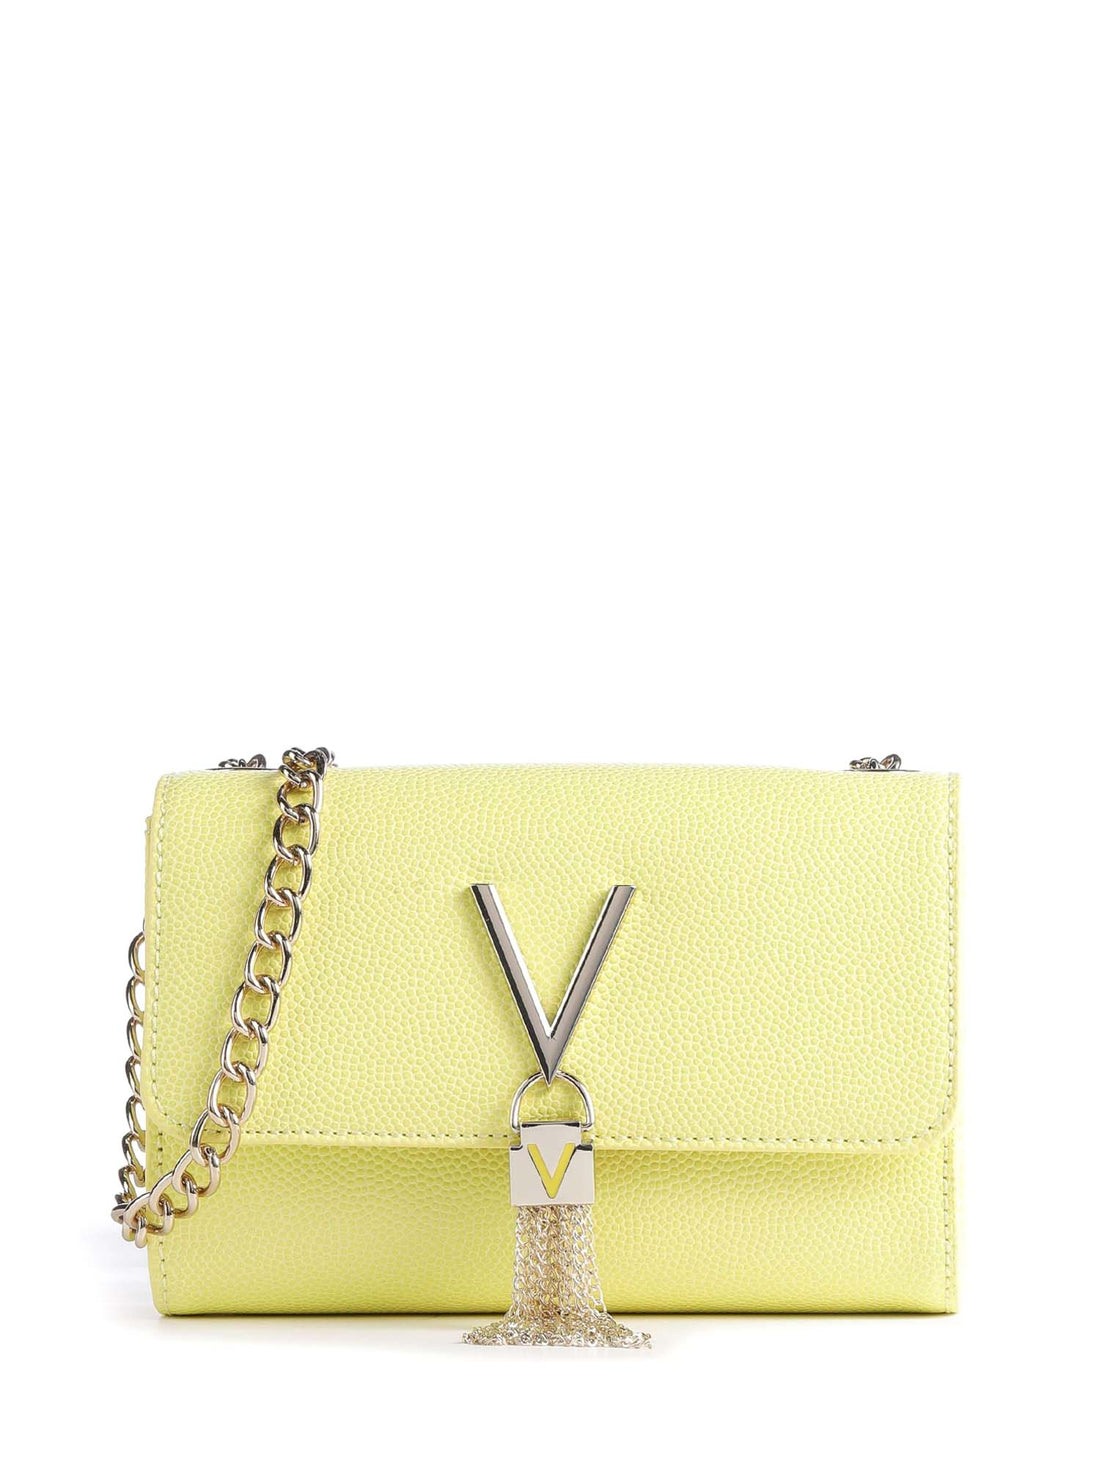 Valentino Bags Tracolla VBS1R403G